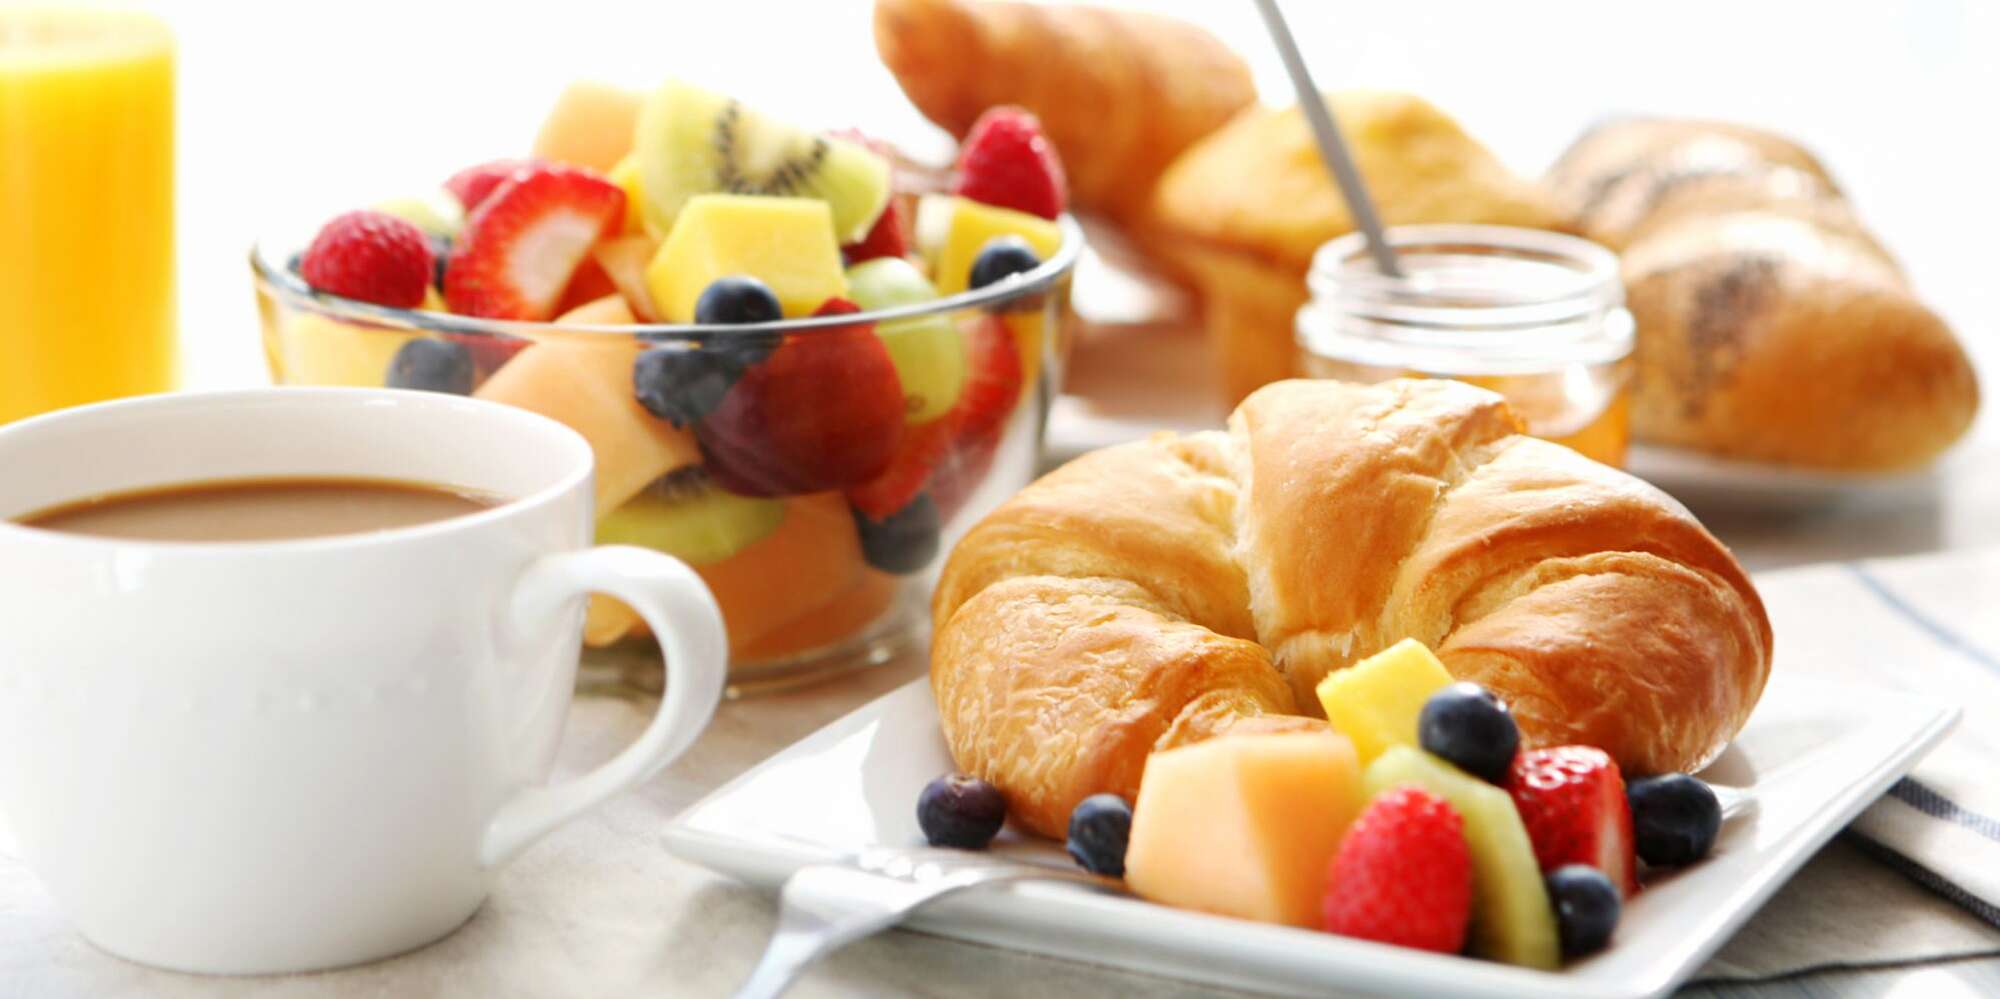 What Is a Continental Breakfast, Exactly? | MyRecipes